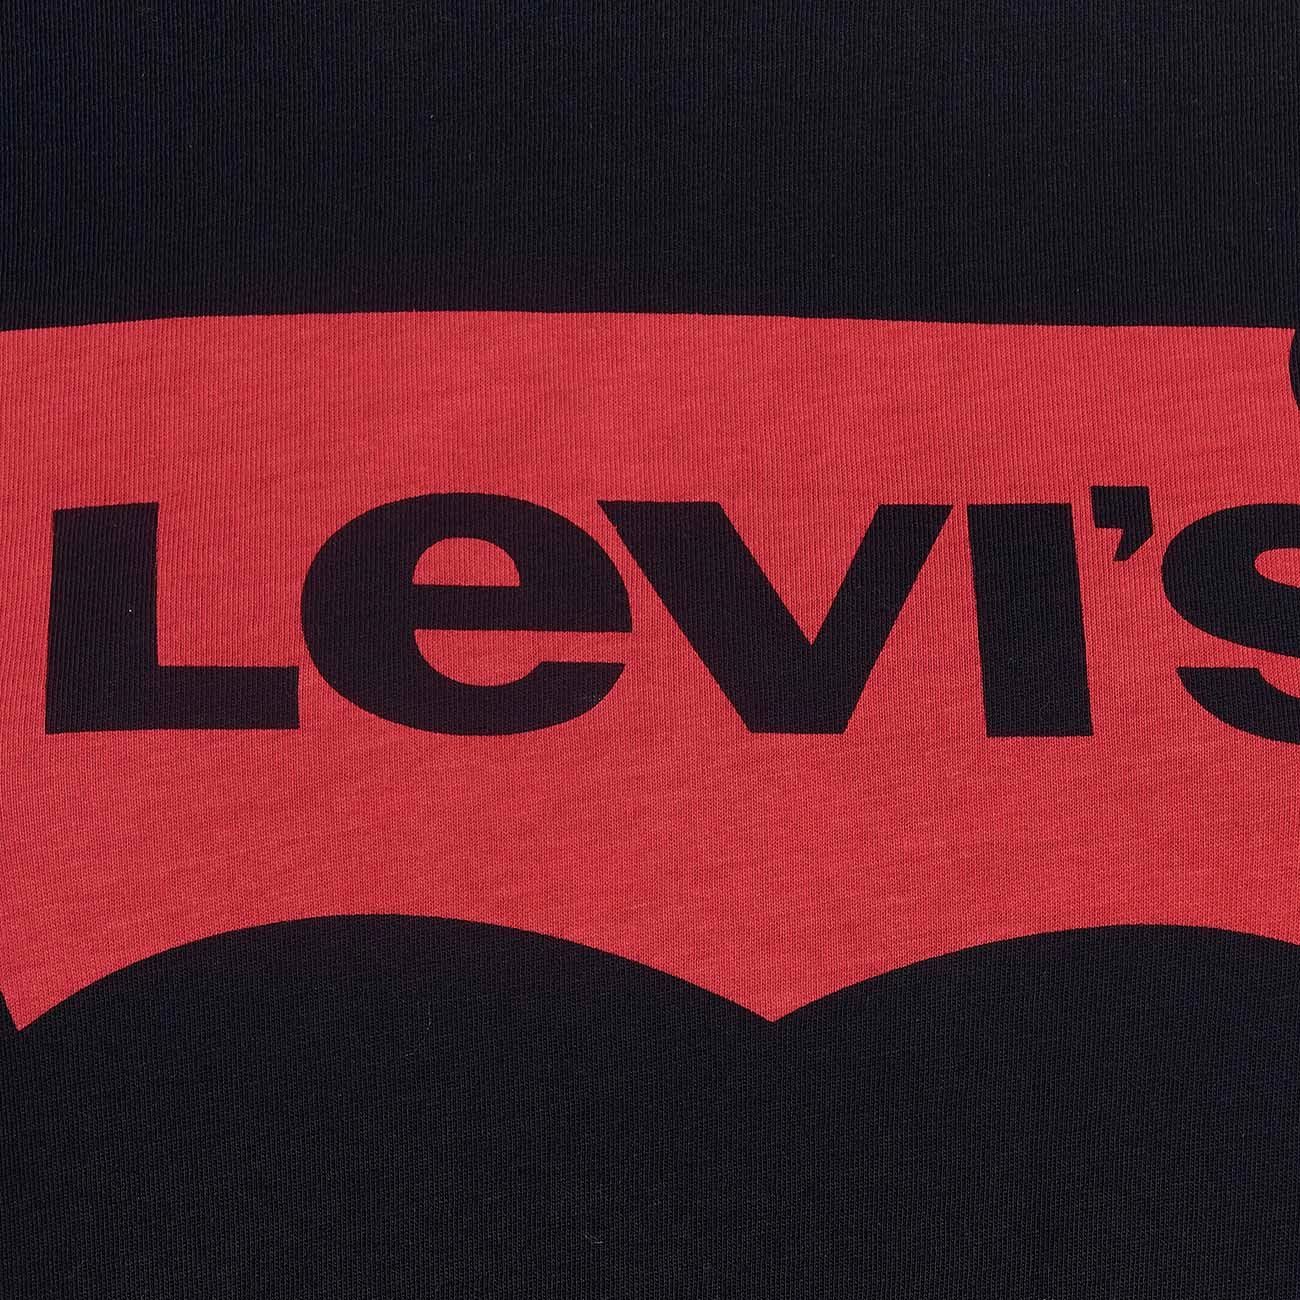 LEVIS T-SHIRT THE PERFECT GRAPHIC TEE WITH LOGO Woman Black Red |  Mascheroni Sportswear